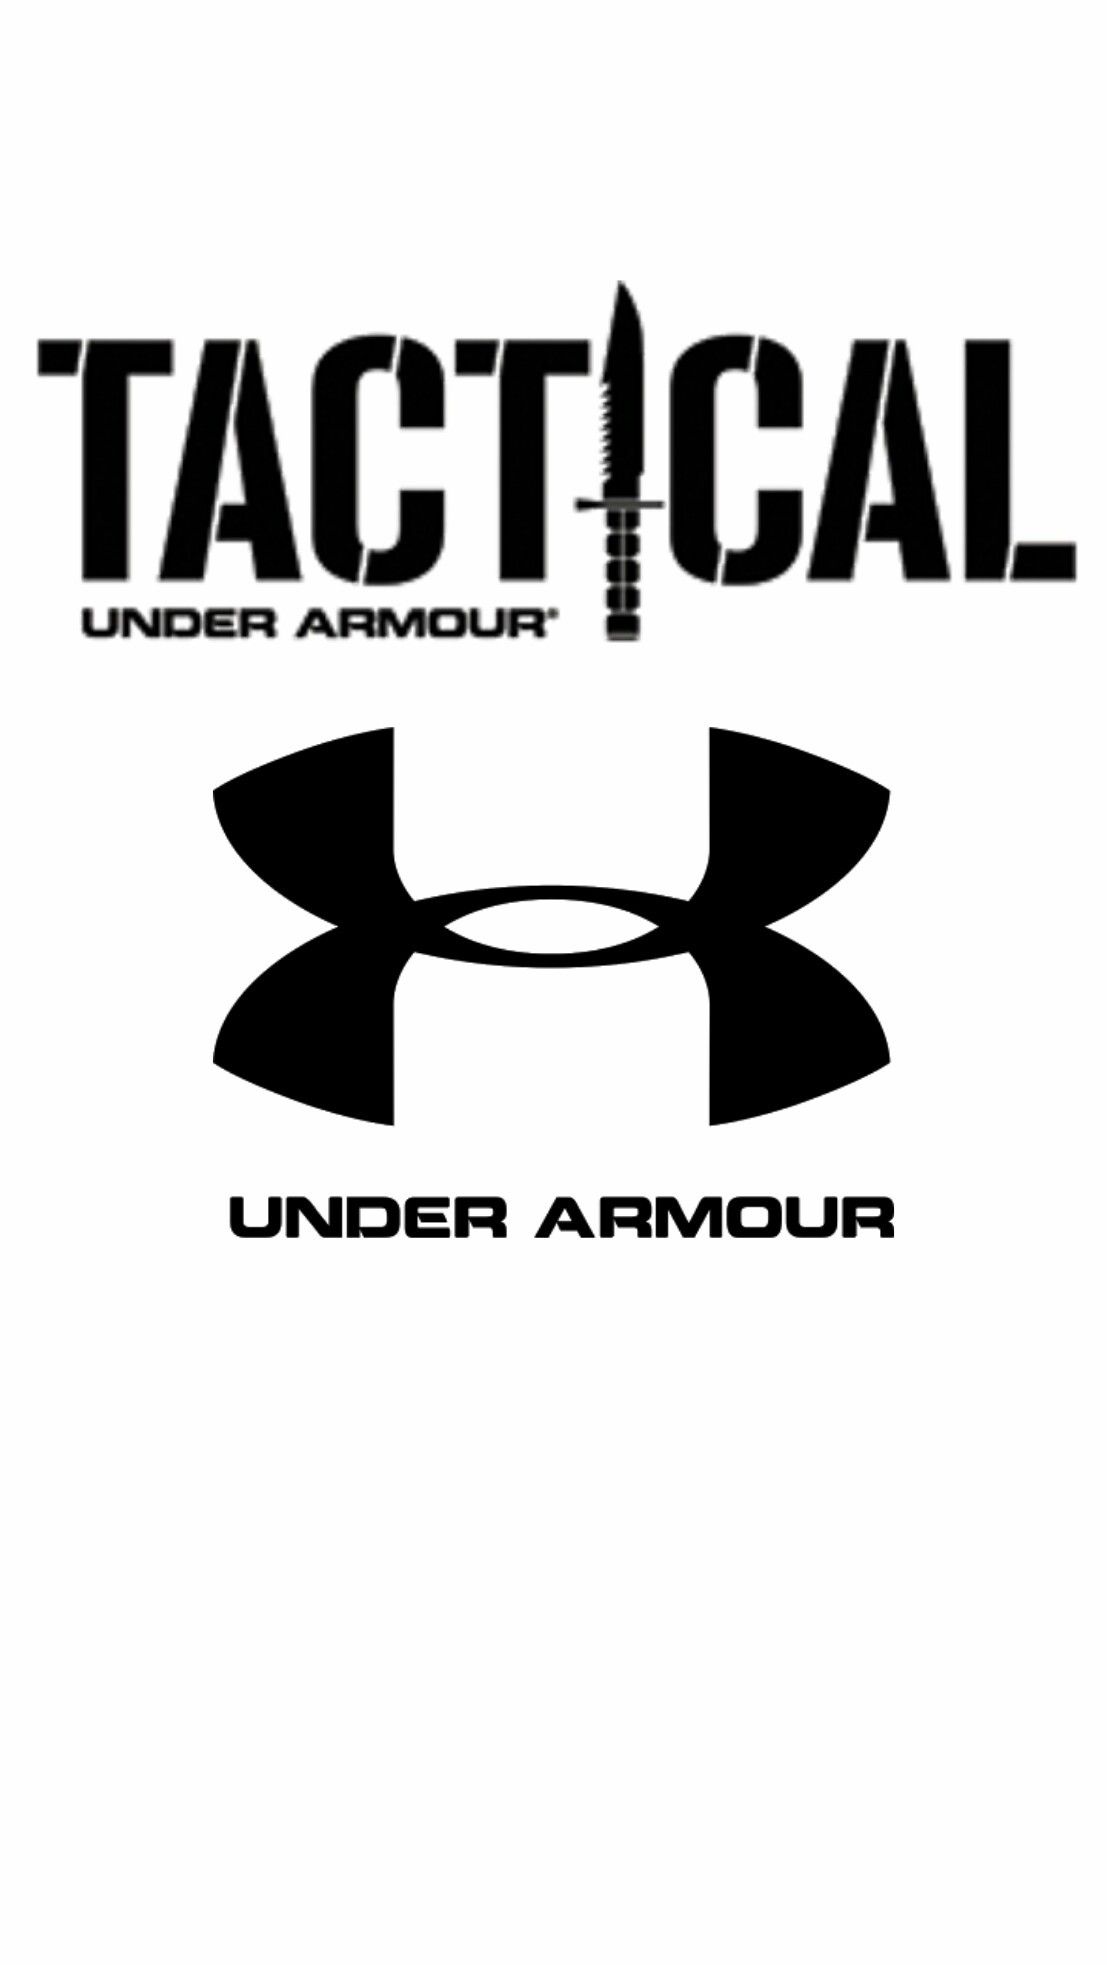 Under Armour Wallpaper Hd Data-src /large/976896 - Under Armour Iphone ...